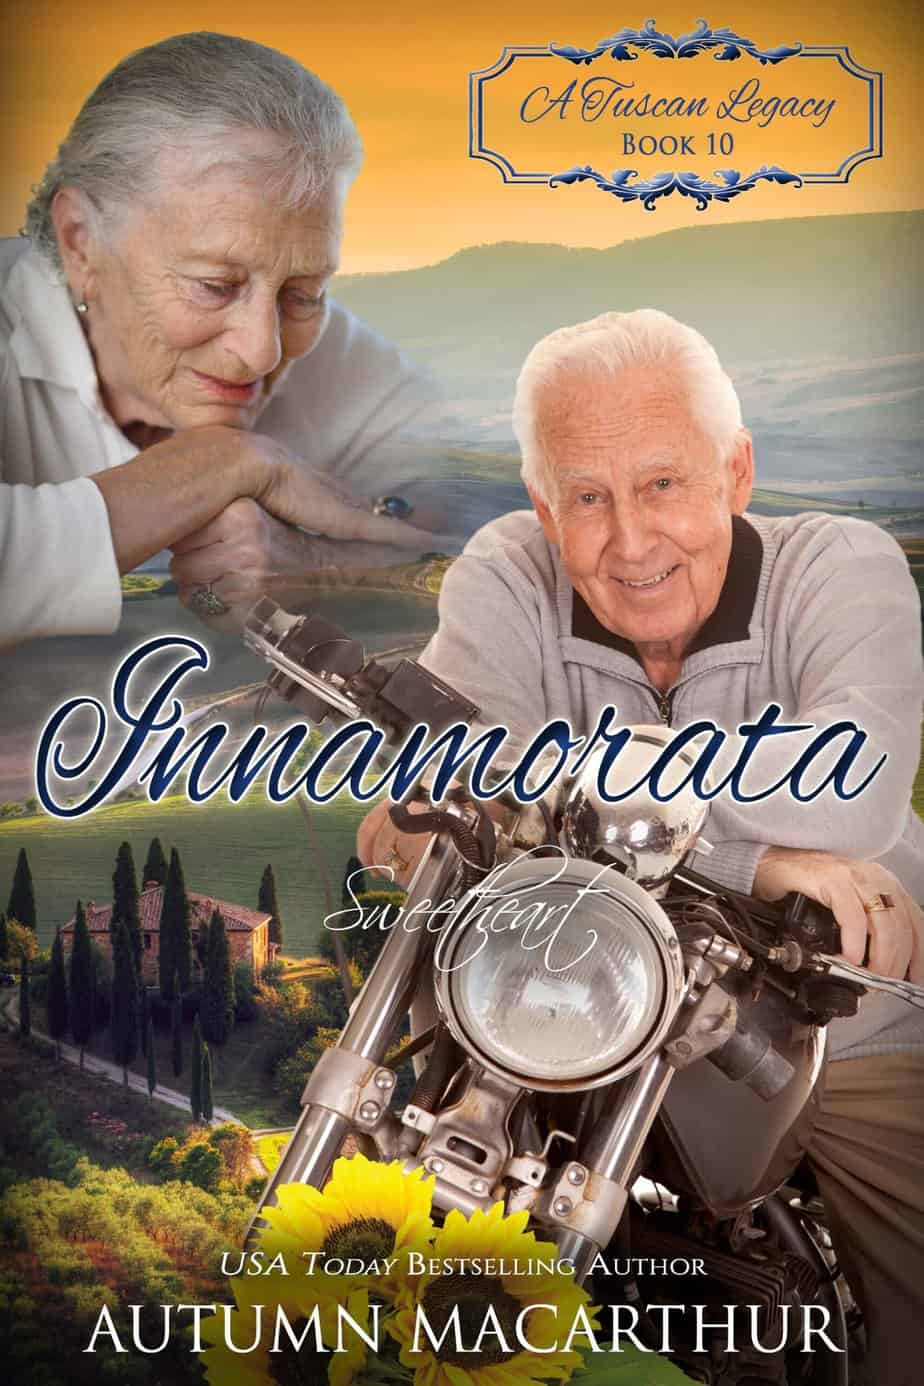 Cover image for Innamorata by Autumn Macarthur, a follow-up shorter novella in the A Tuscan Legacy multi-author series featuring former teen loves reuniting in their 80s in Tuscany.